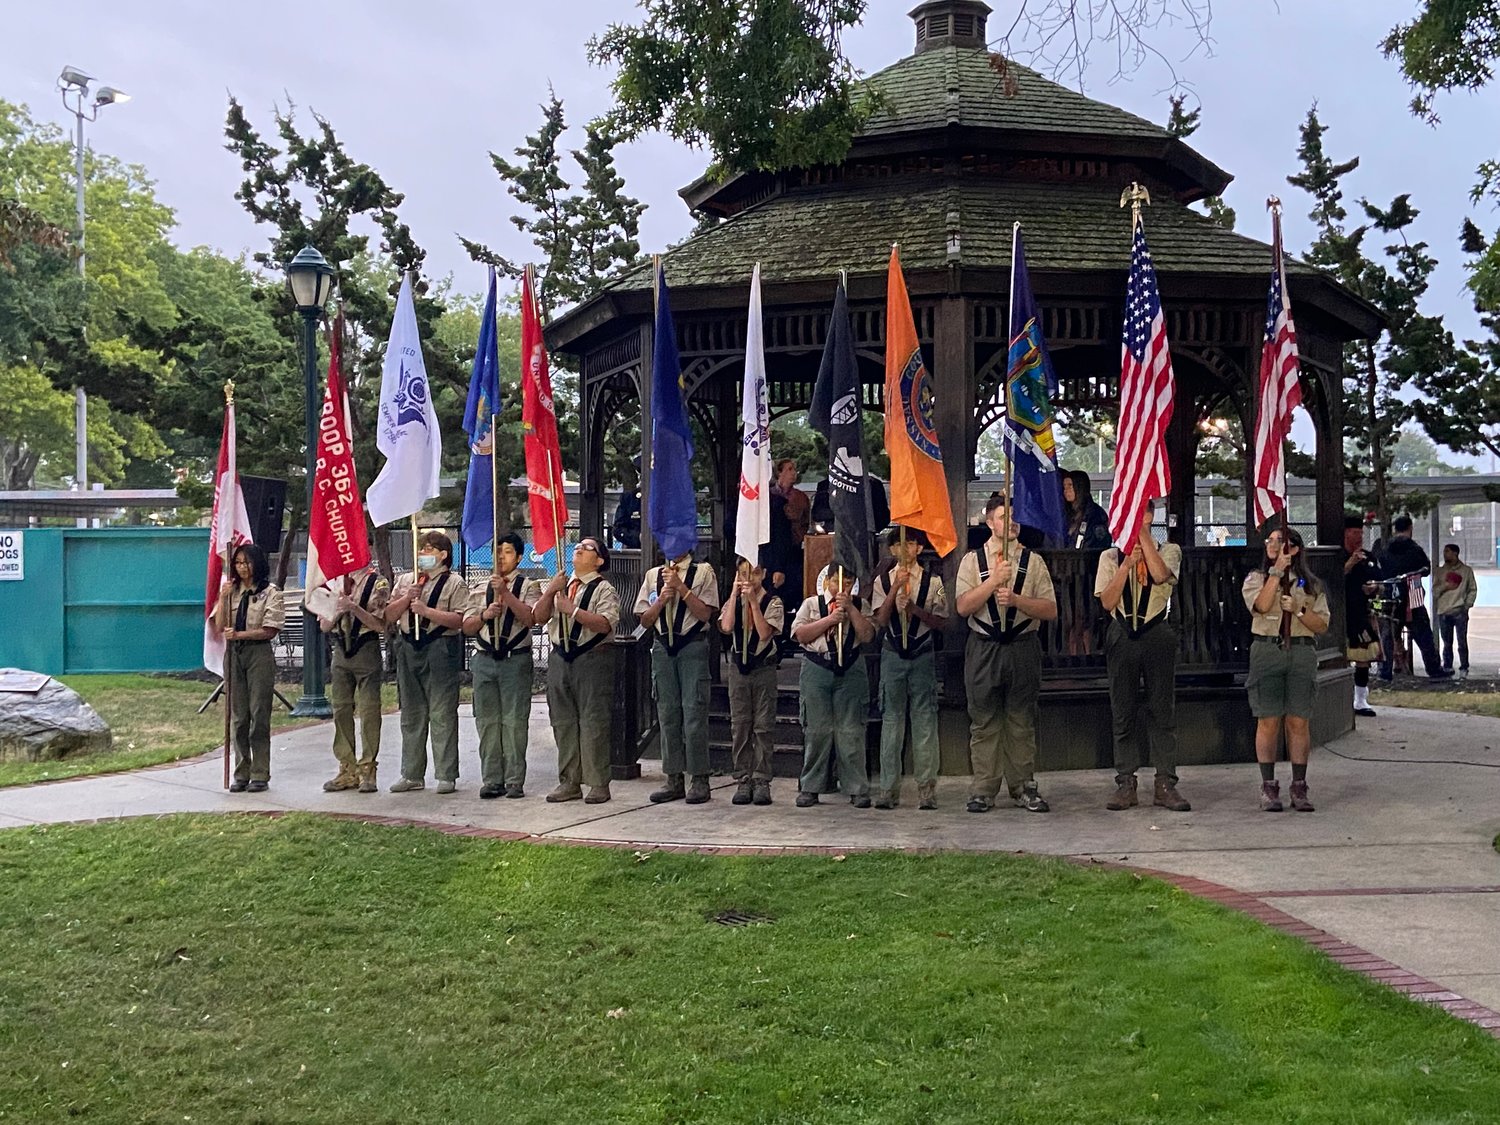 Local Scout’s paid tribute to the lives lost in the terrorist attacks at a memorial hosted by the East Meadow Fire Department on Sept. 11.